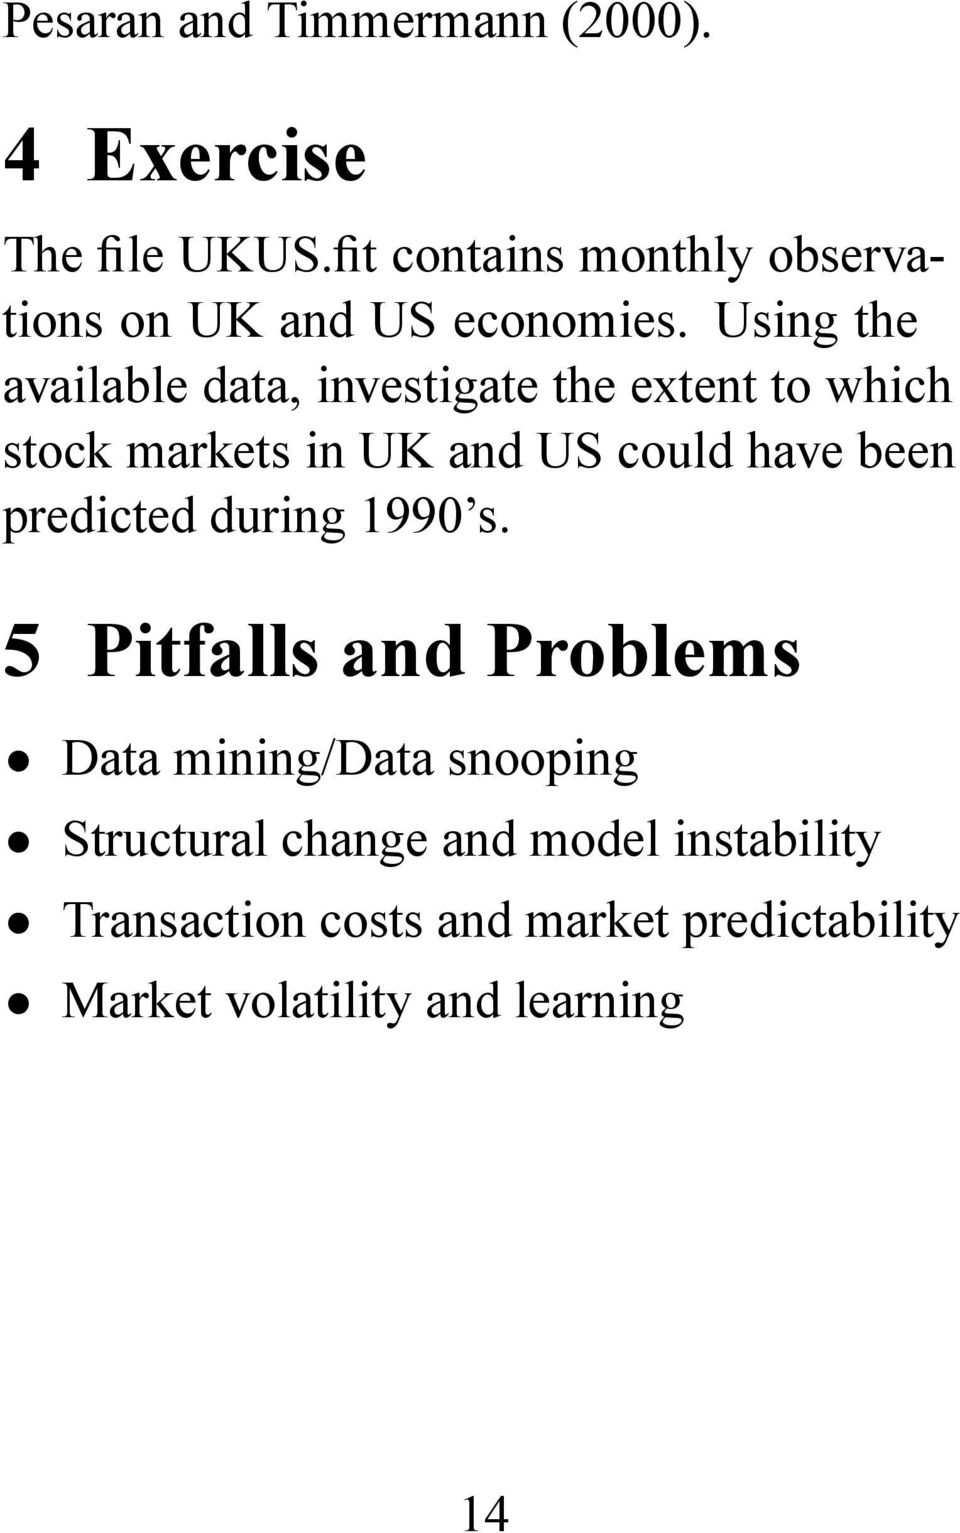 Using the available data, investigate the extent to which stock markets in UK and US could have been